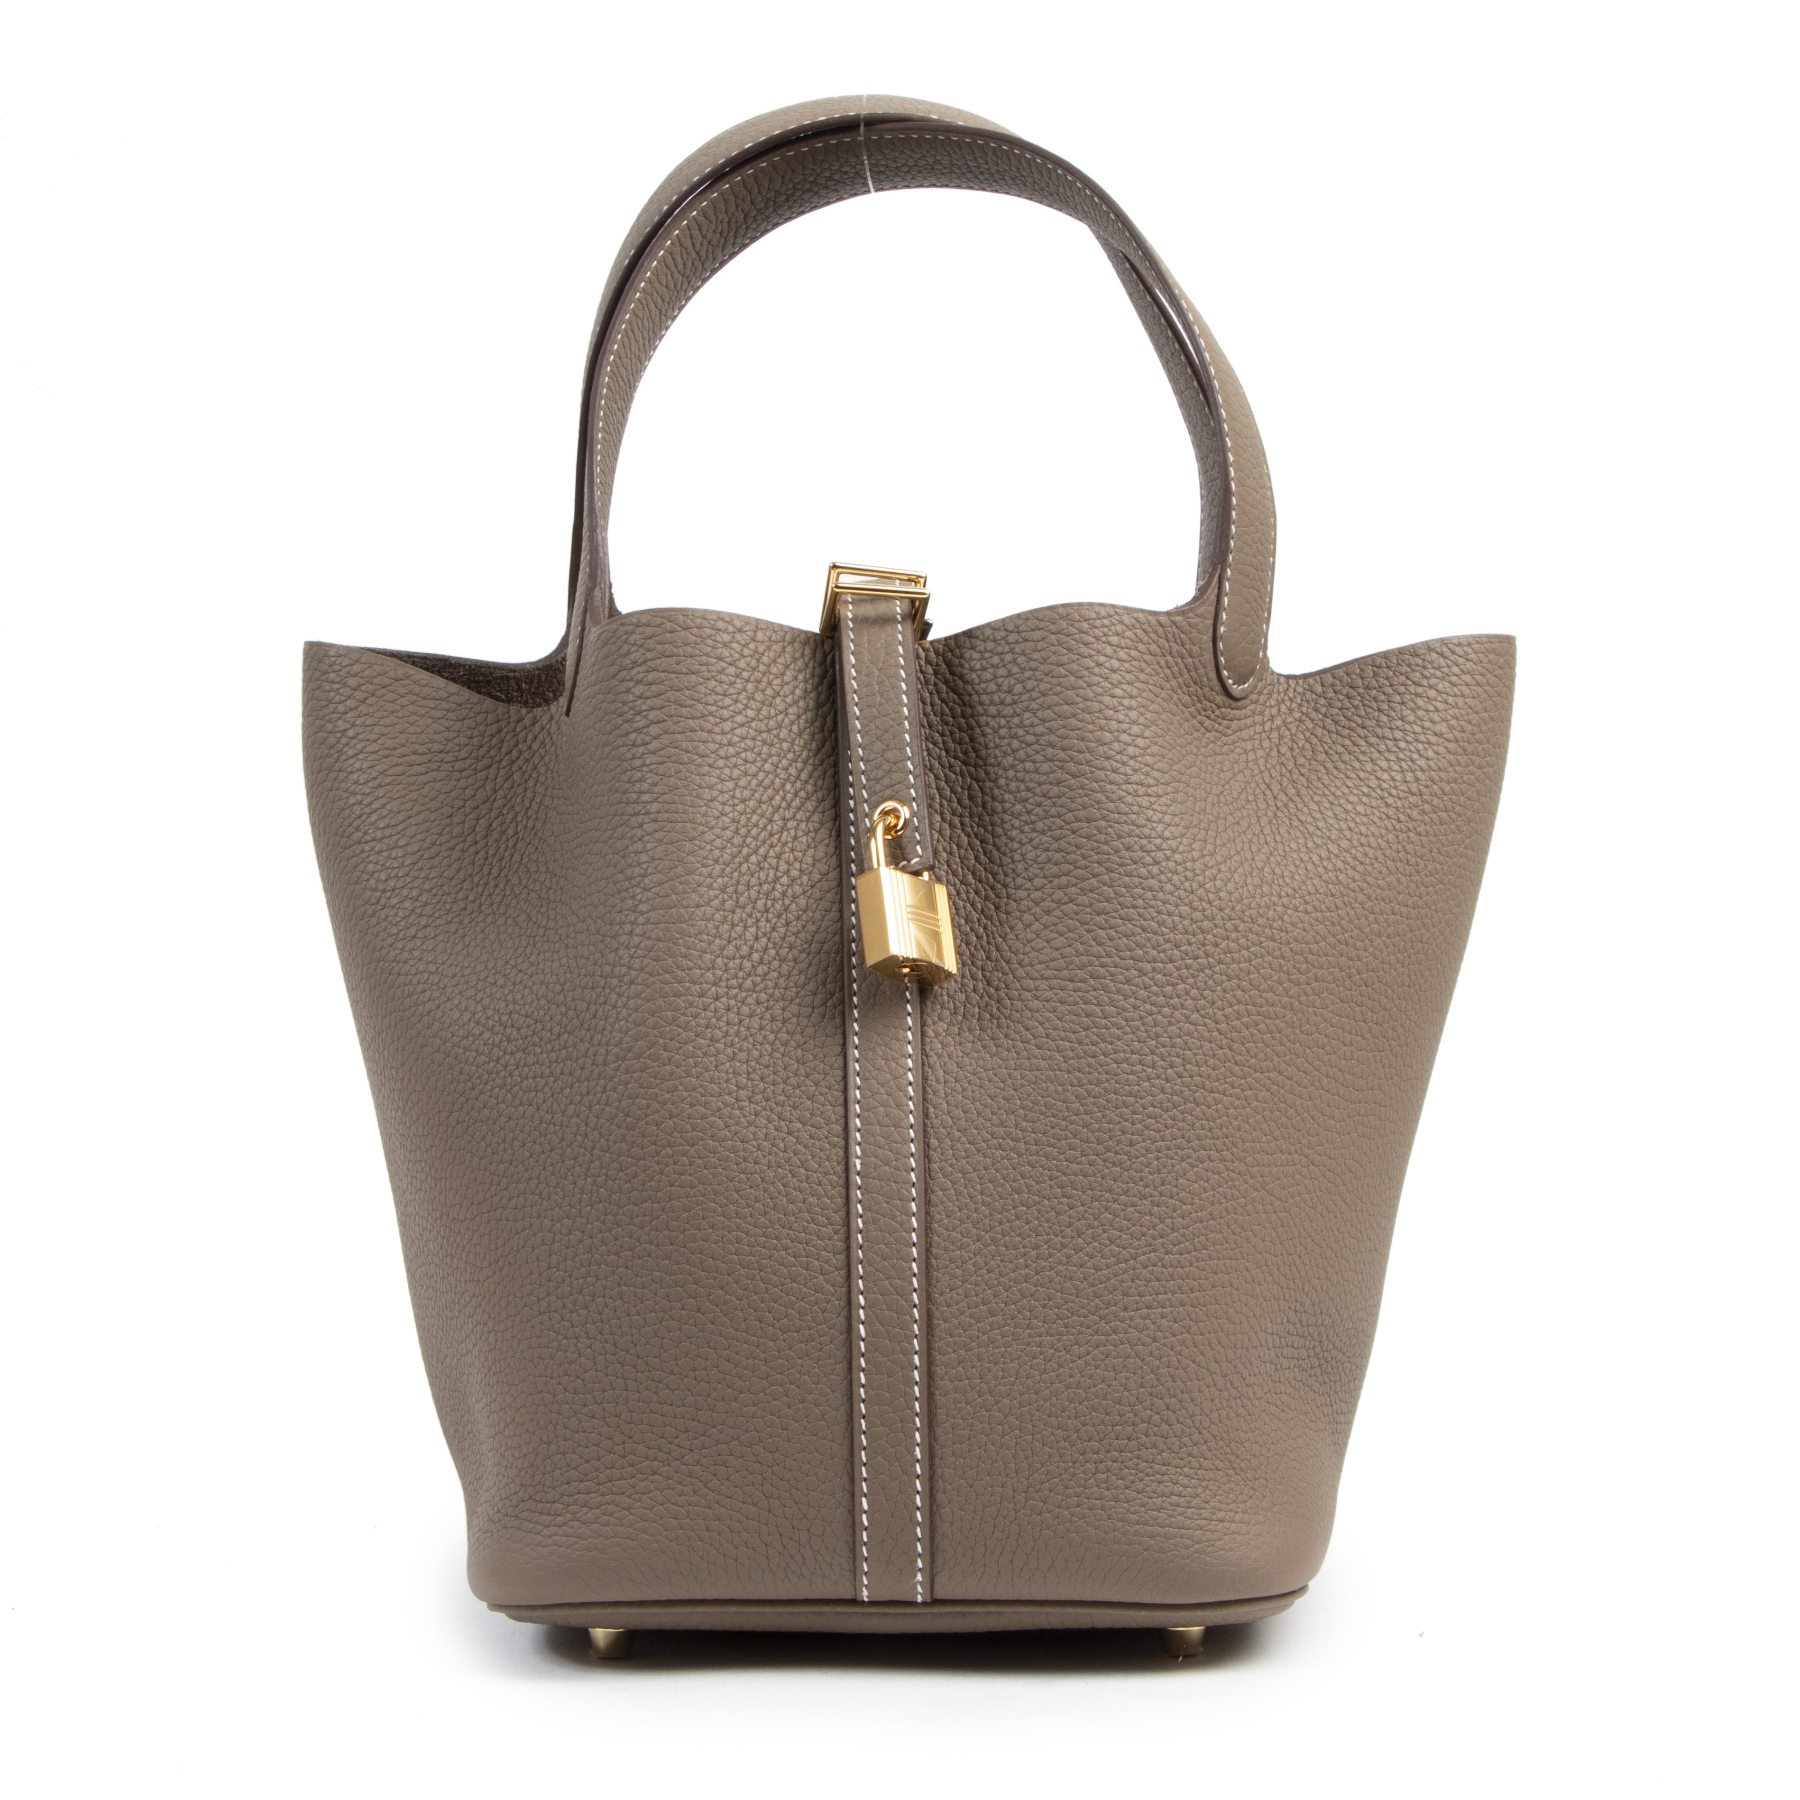 Hermes Etoupe Picotin | rededuct.com